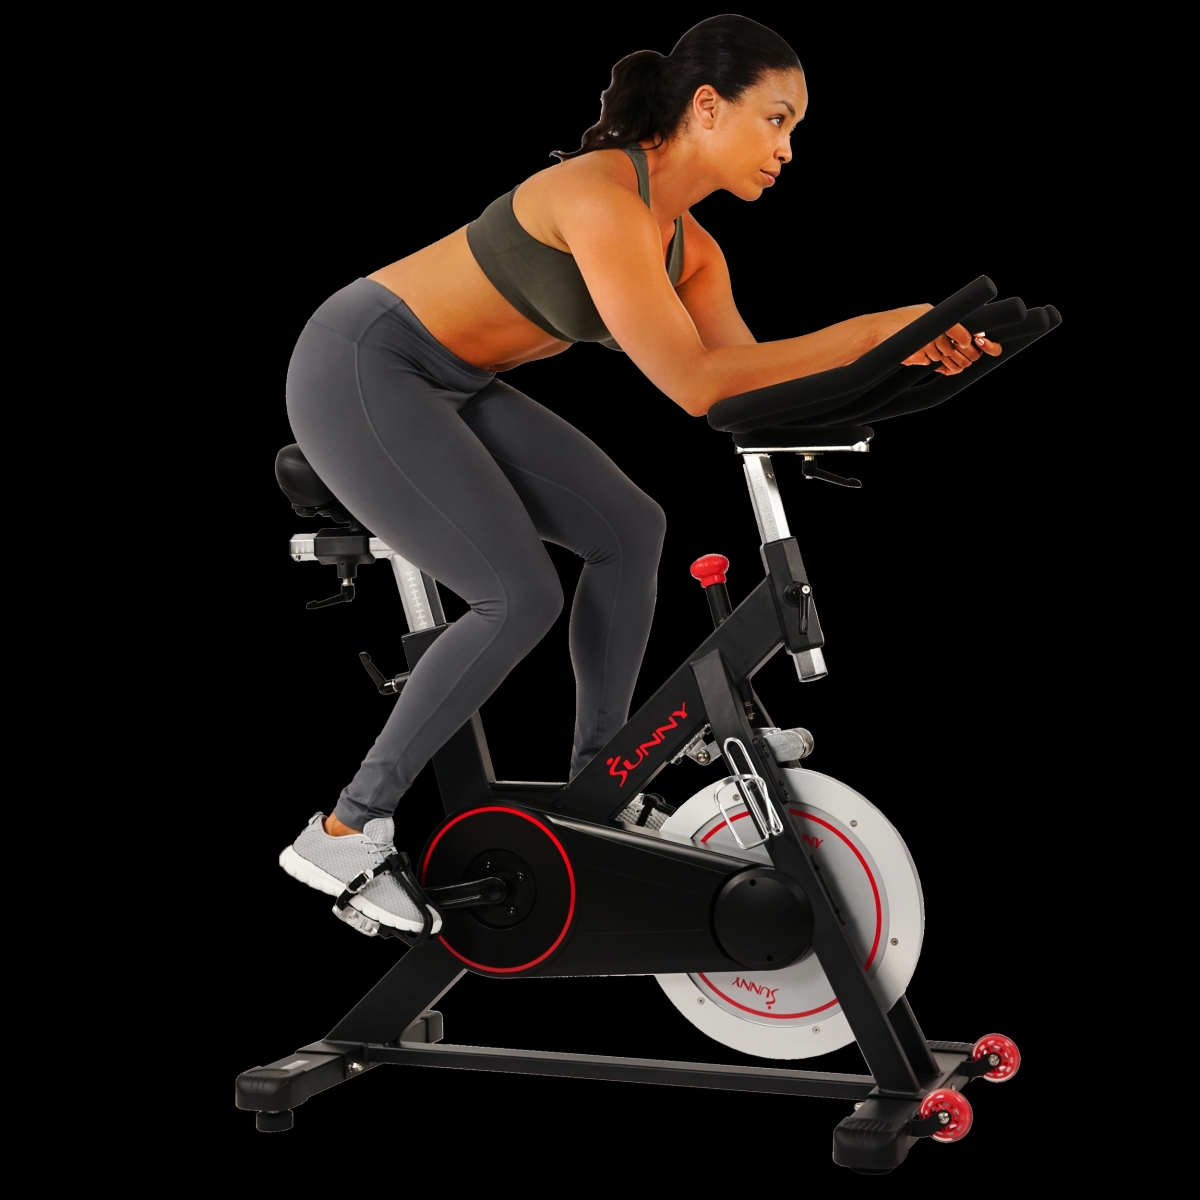 Medis One Magnetic Belt Drive Indoor Cycling Bike with High Weight Capacity & Tablet Holder